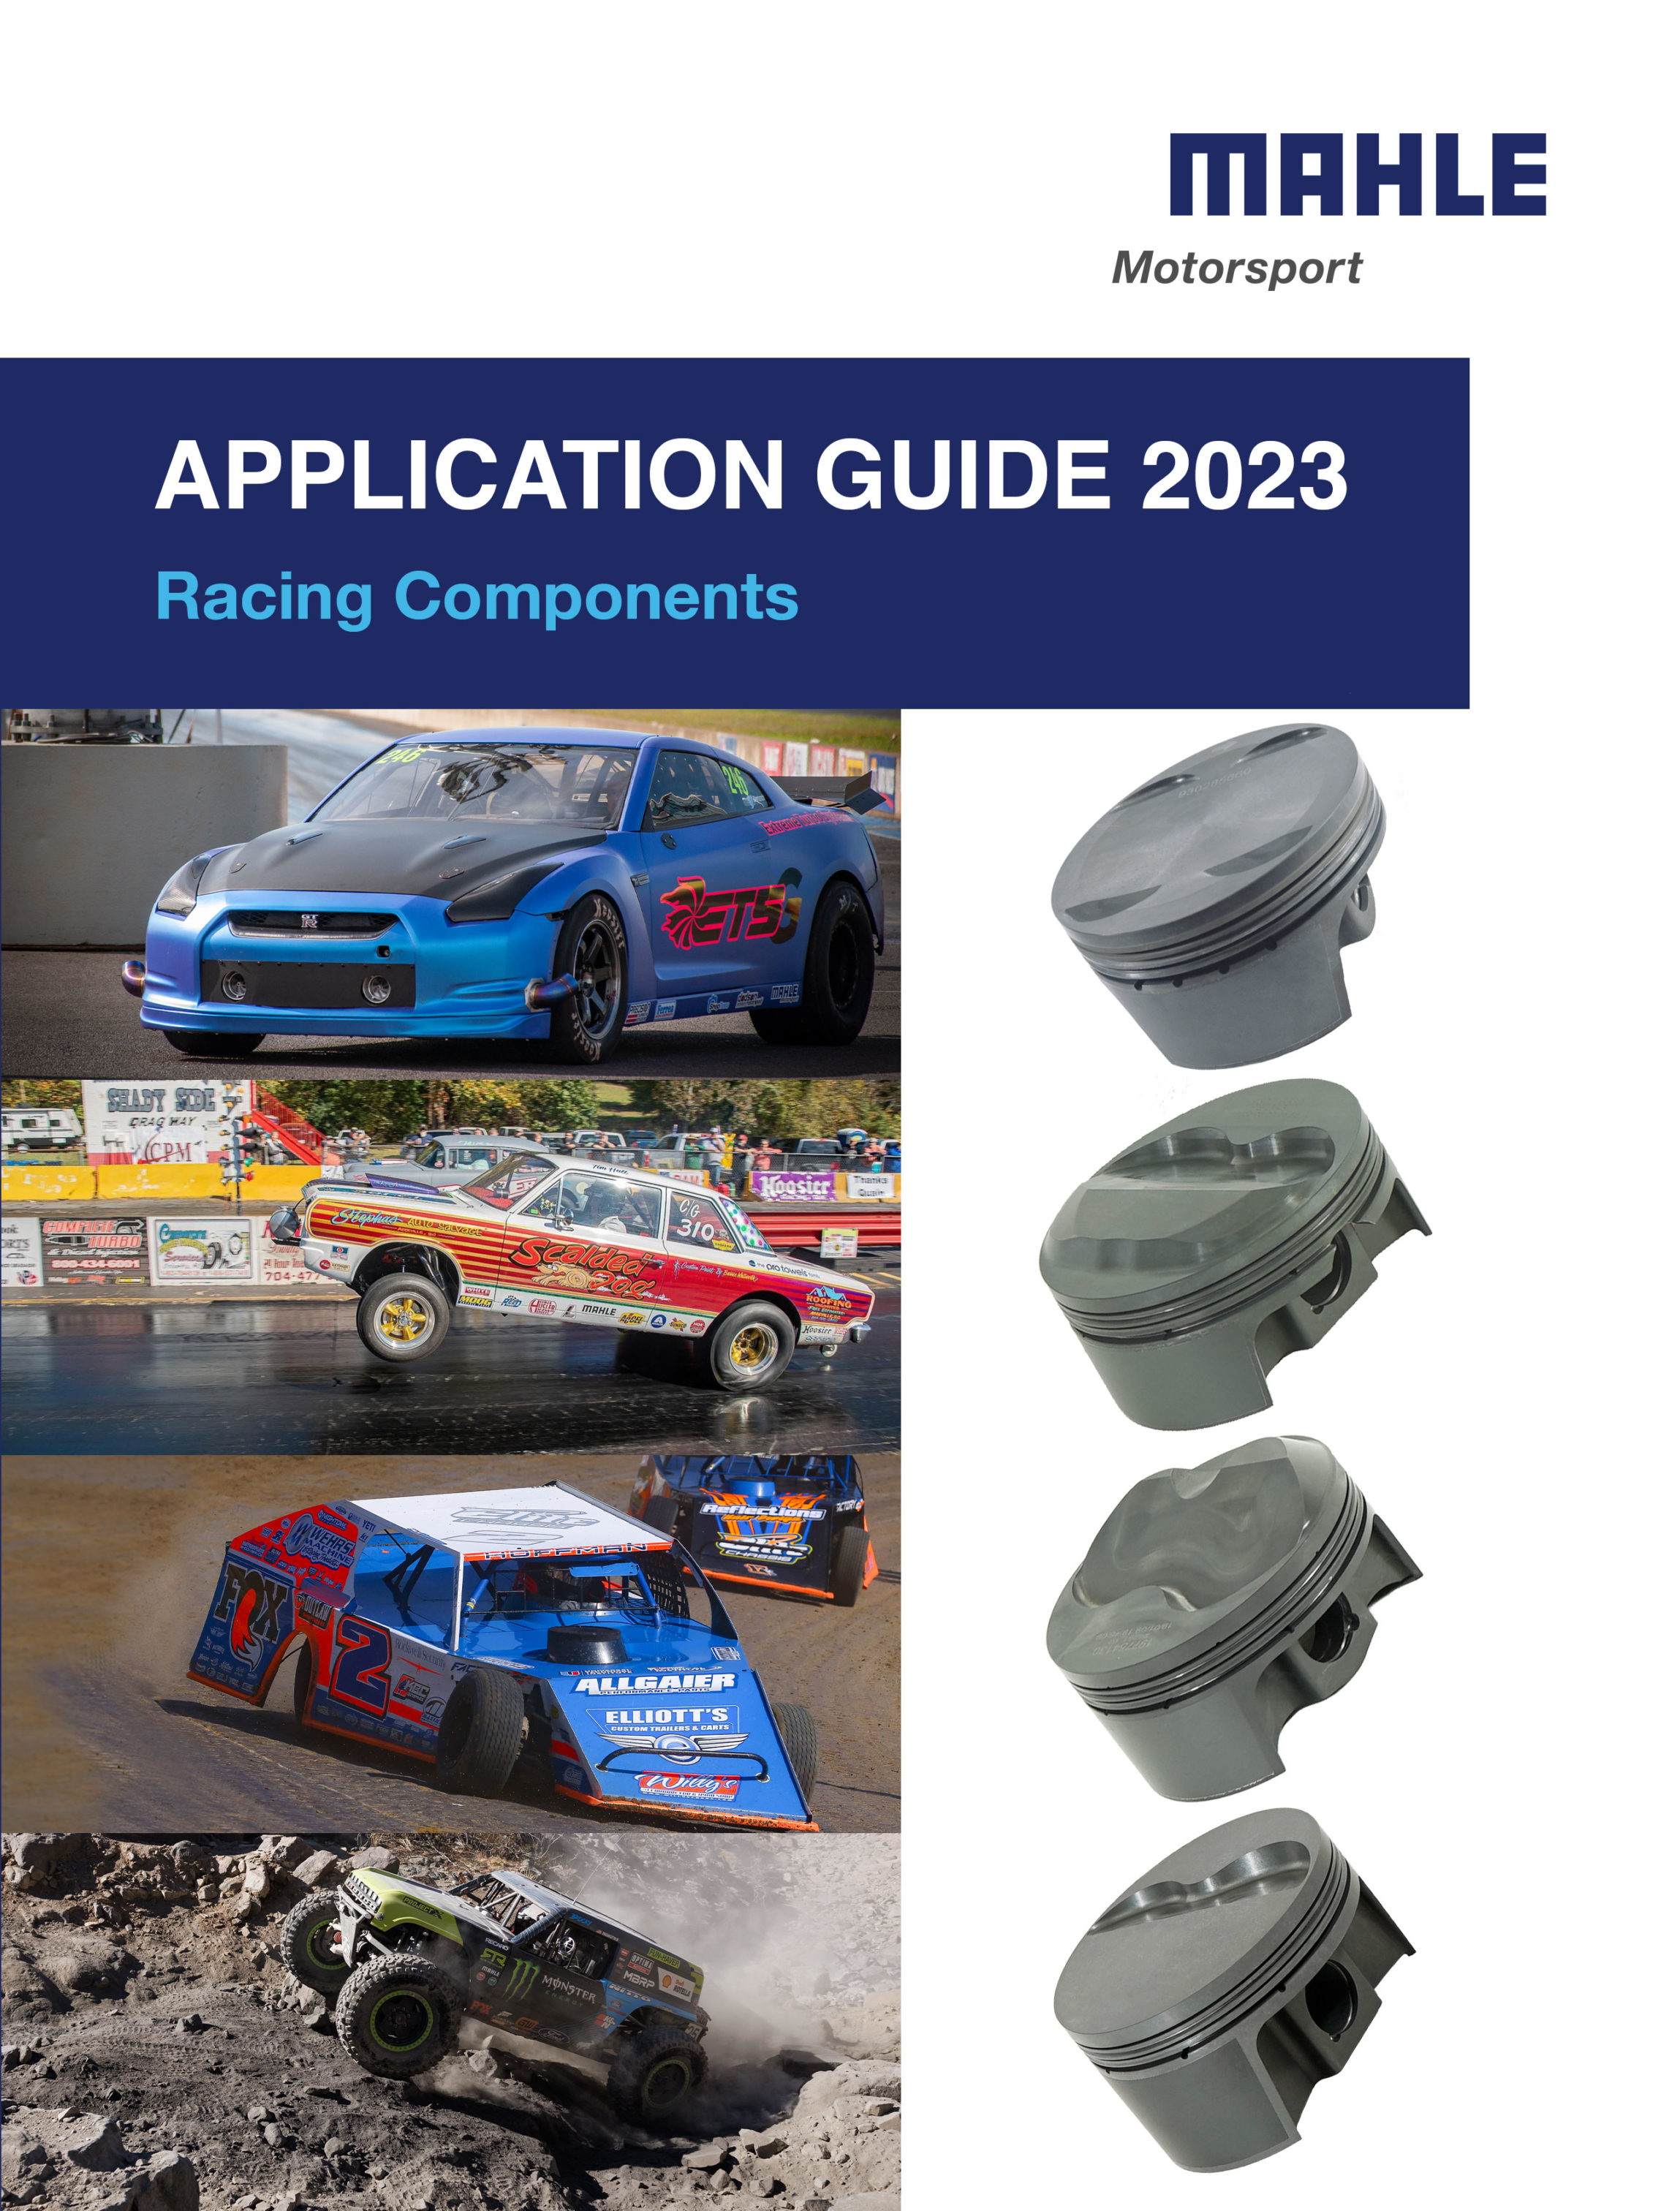 MAHLE Motorsport, the technology leader in high-performance PowerPak piston sets for street or race applications, announces the availability of the company’s new 2023 Application Guide. 